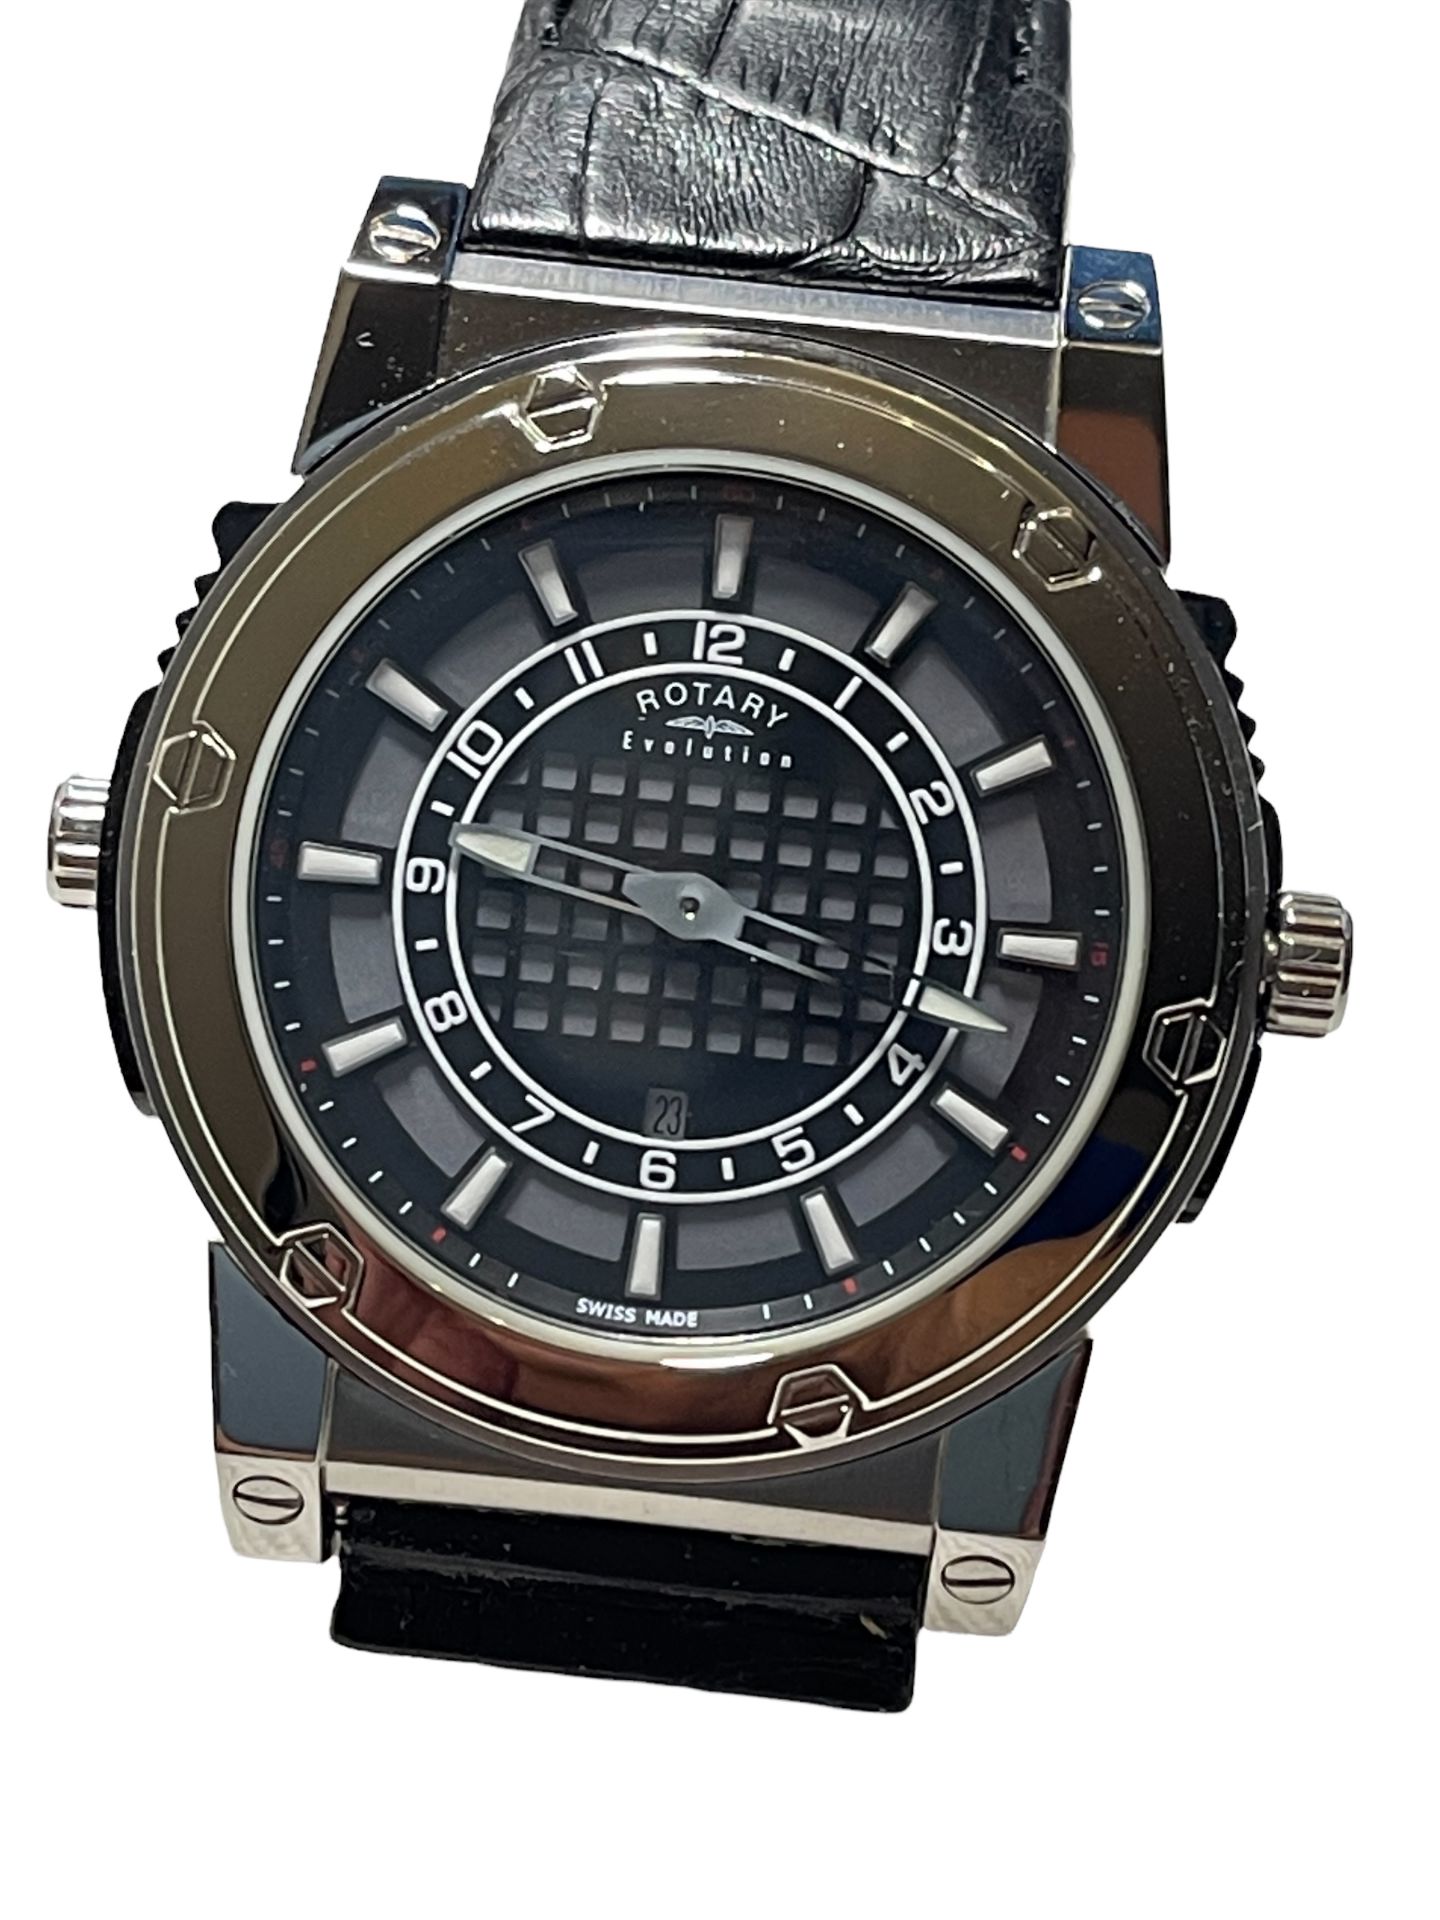 Swiss Made Rotary Evolution Dual Face Unisex Watch - Surplus Stock from Private Jet Charter RRP £750 - Image 4 of 14